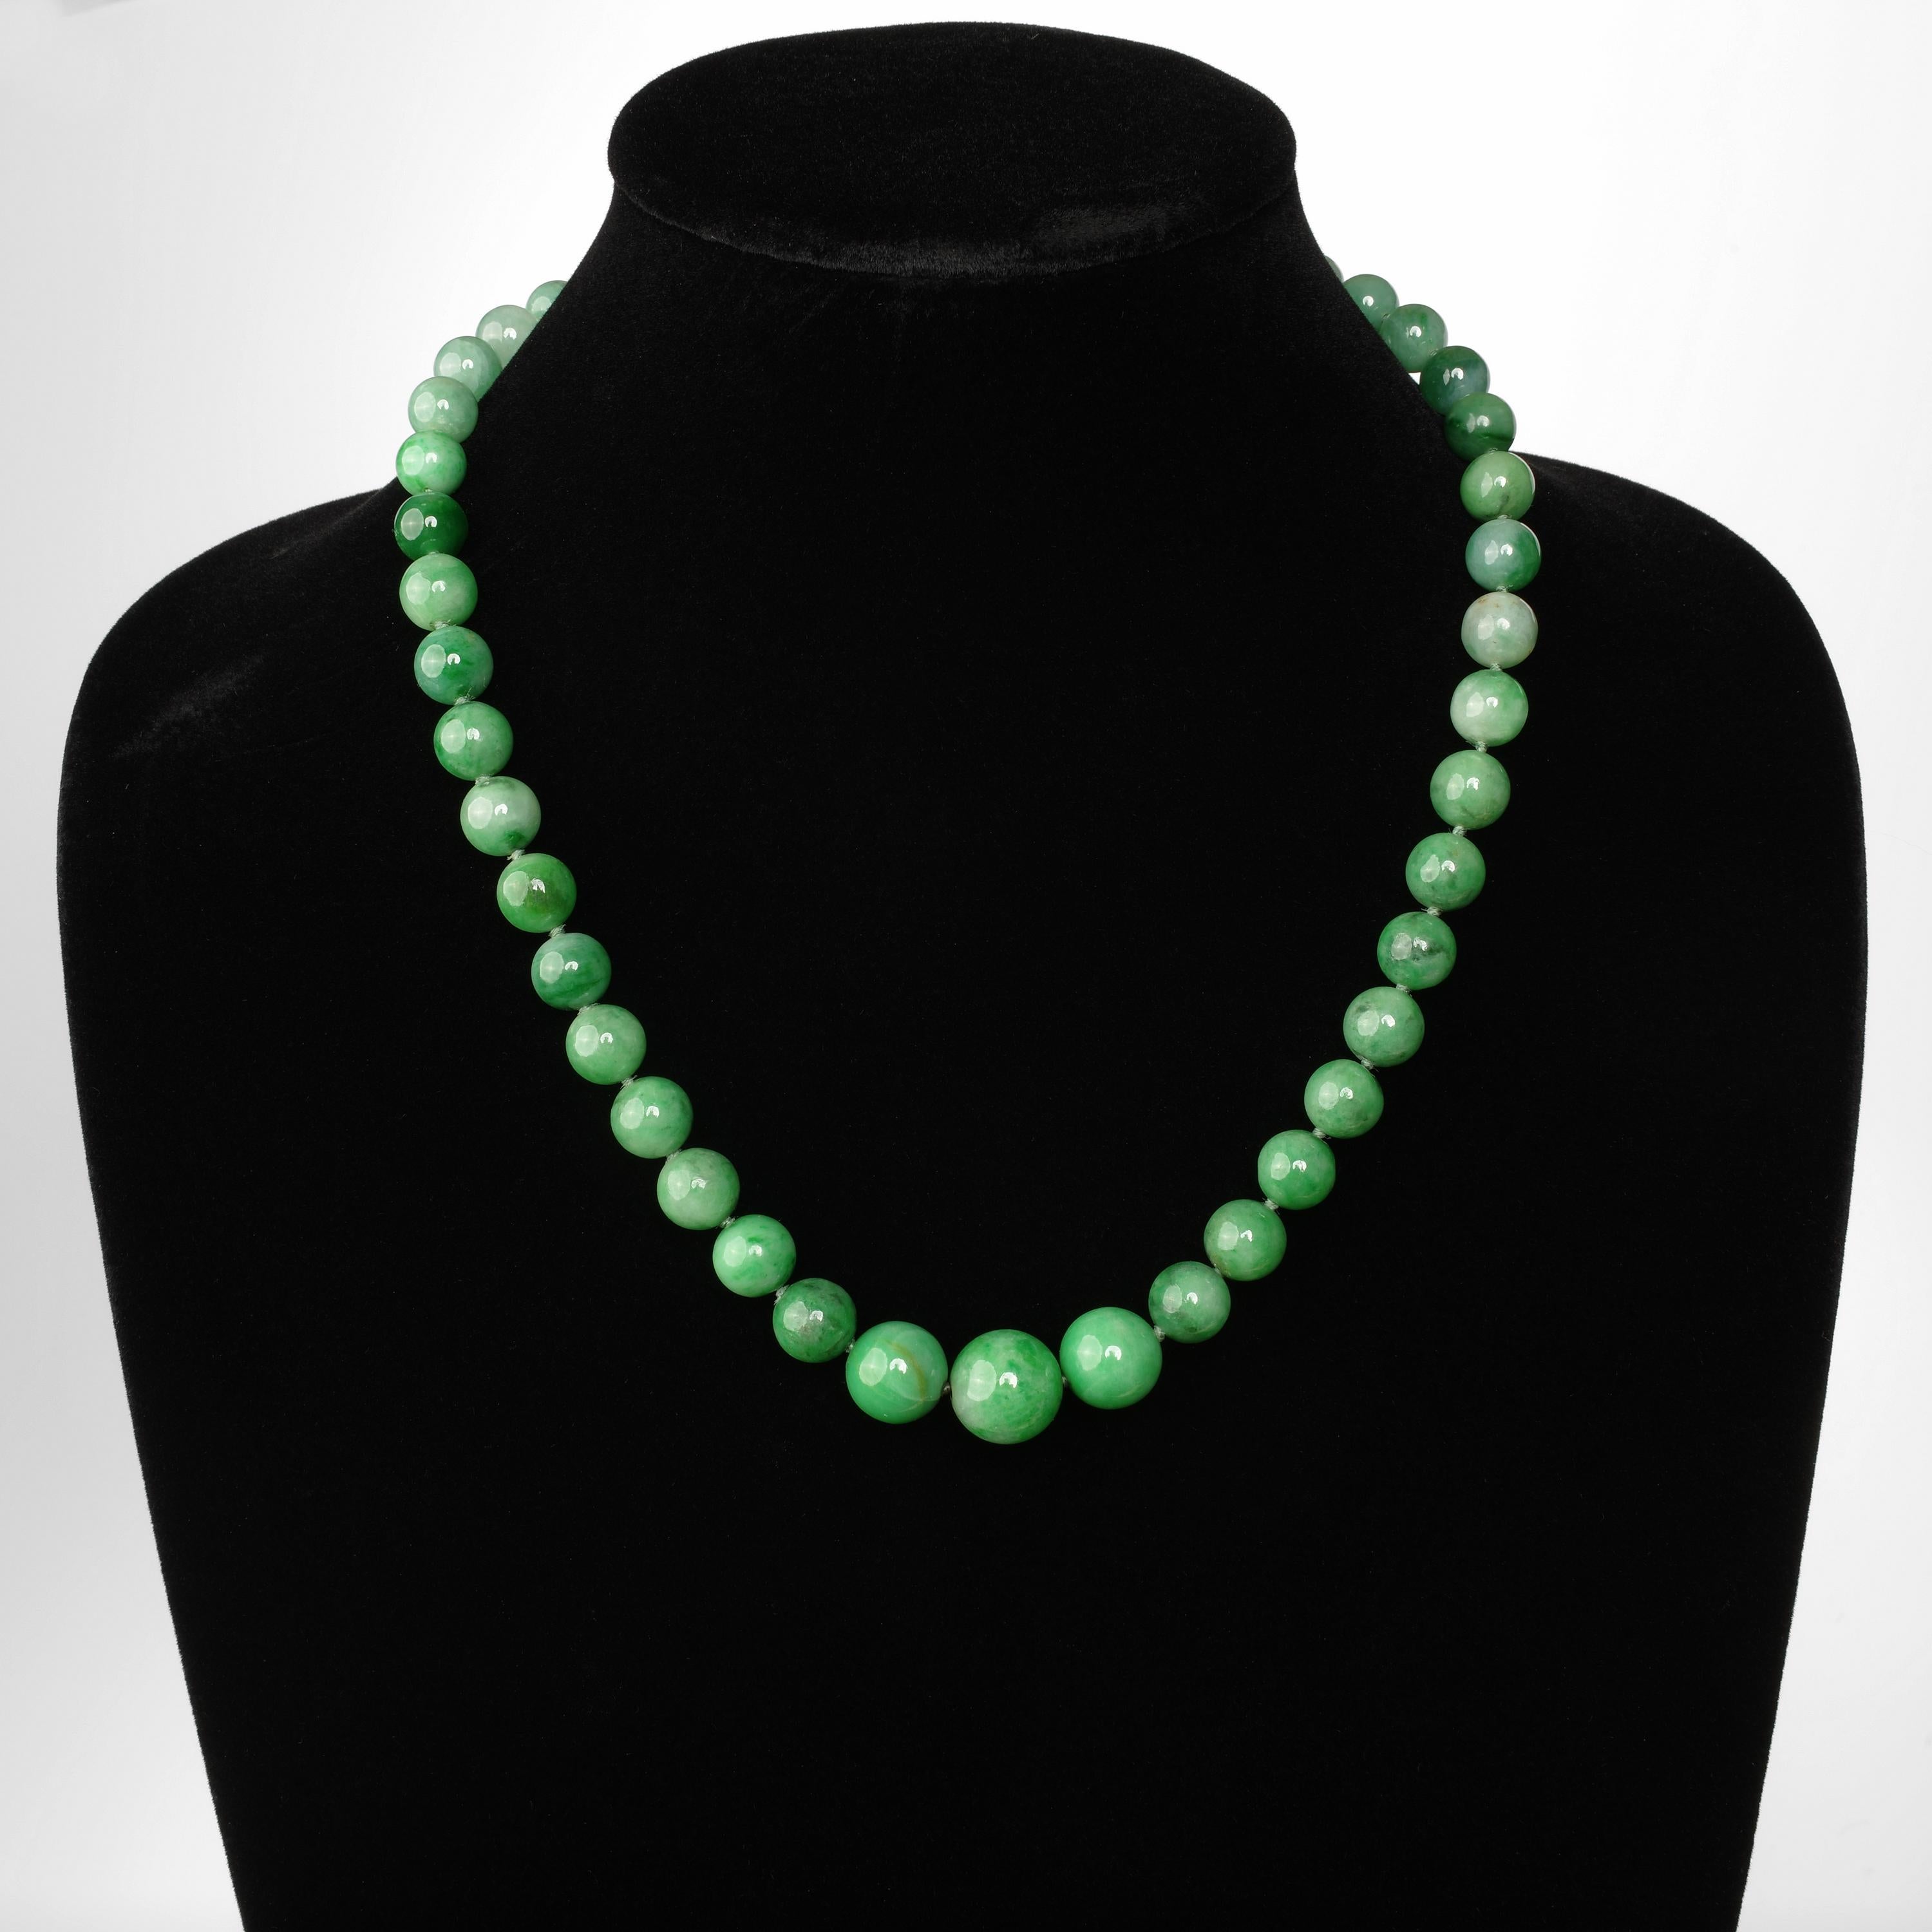 This exceptionally rare and important jade necklace is comprised of forty-seven hand-carved Mason Kay certified natural and untreated 